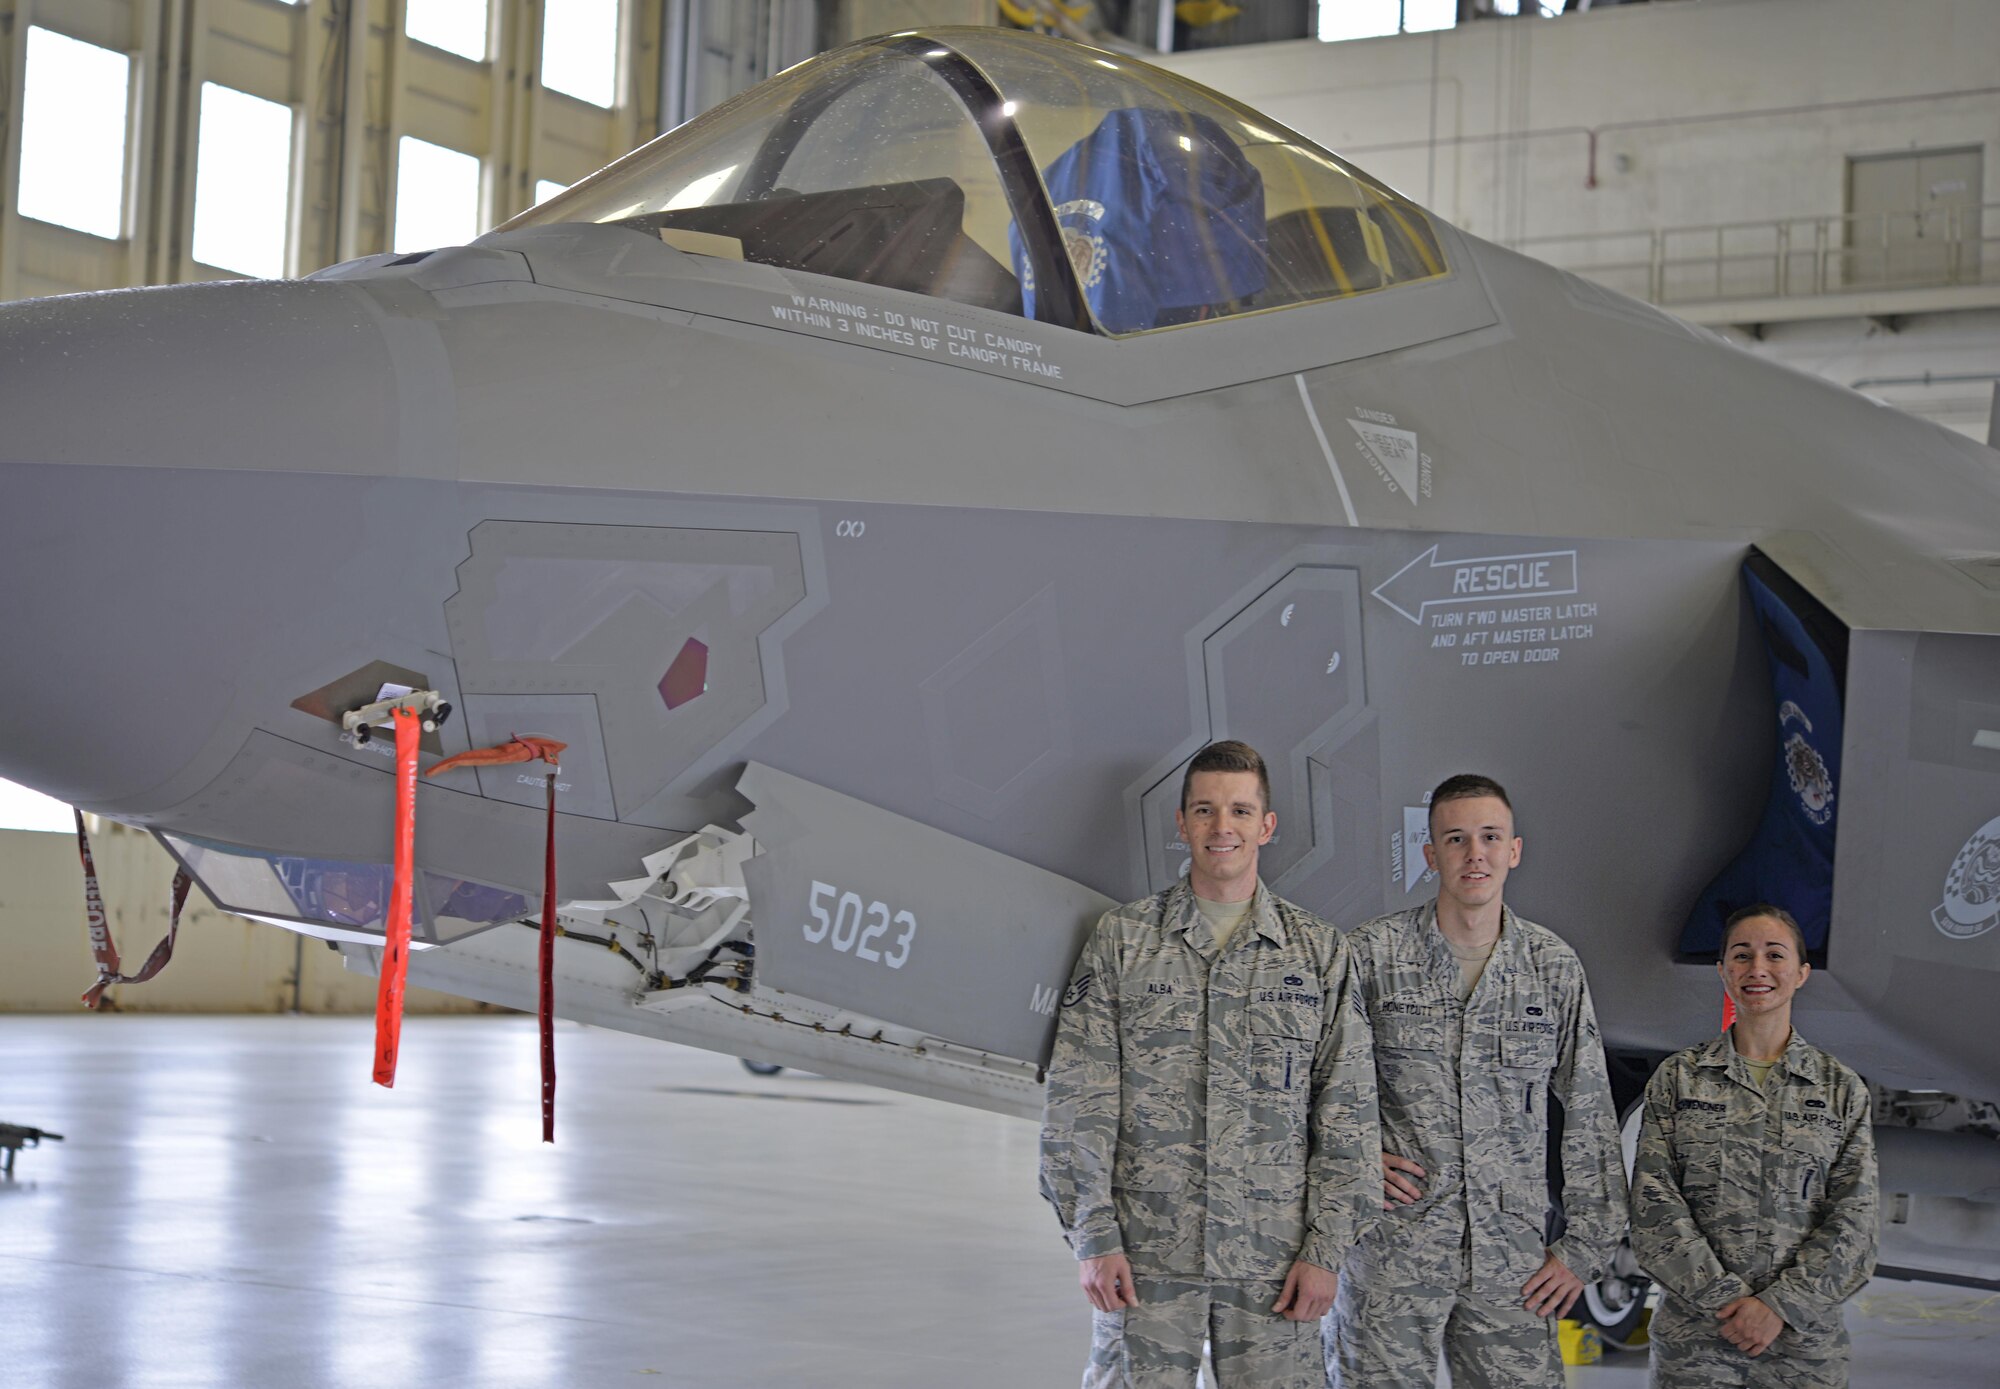 Load crew four from the 33rd Fighter Wing stand with the F-35A Lightning II before a load competition begins at Eglin Air Force Base, Fla., March 18, 2016. This team won the right to go up against the 96th Test Wing in a base wide load competition where the F-35, F-15 Eagle and F-16 Fighting Falcon were loaded to prove who base’s best load team was. During this competition Airmen from both wings competed in a uniform inspection, a written test, a tool box inspection and an integrated load. (U.S. Air Force photo/Staff Sgt. Tarelle Walker)